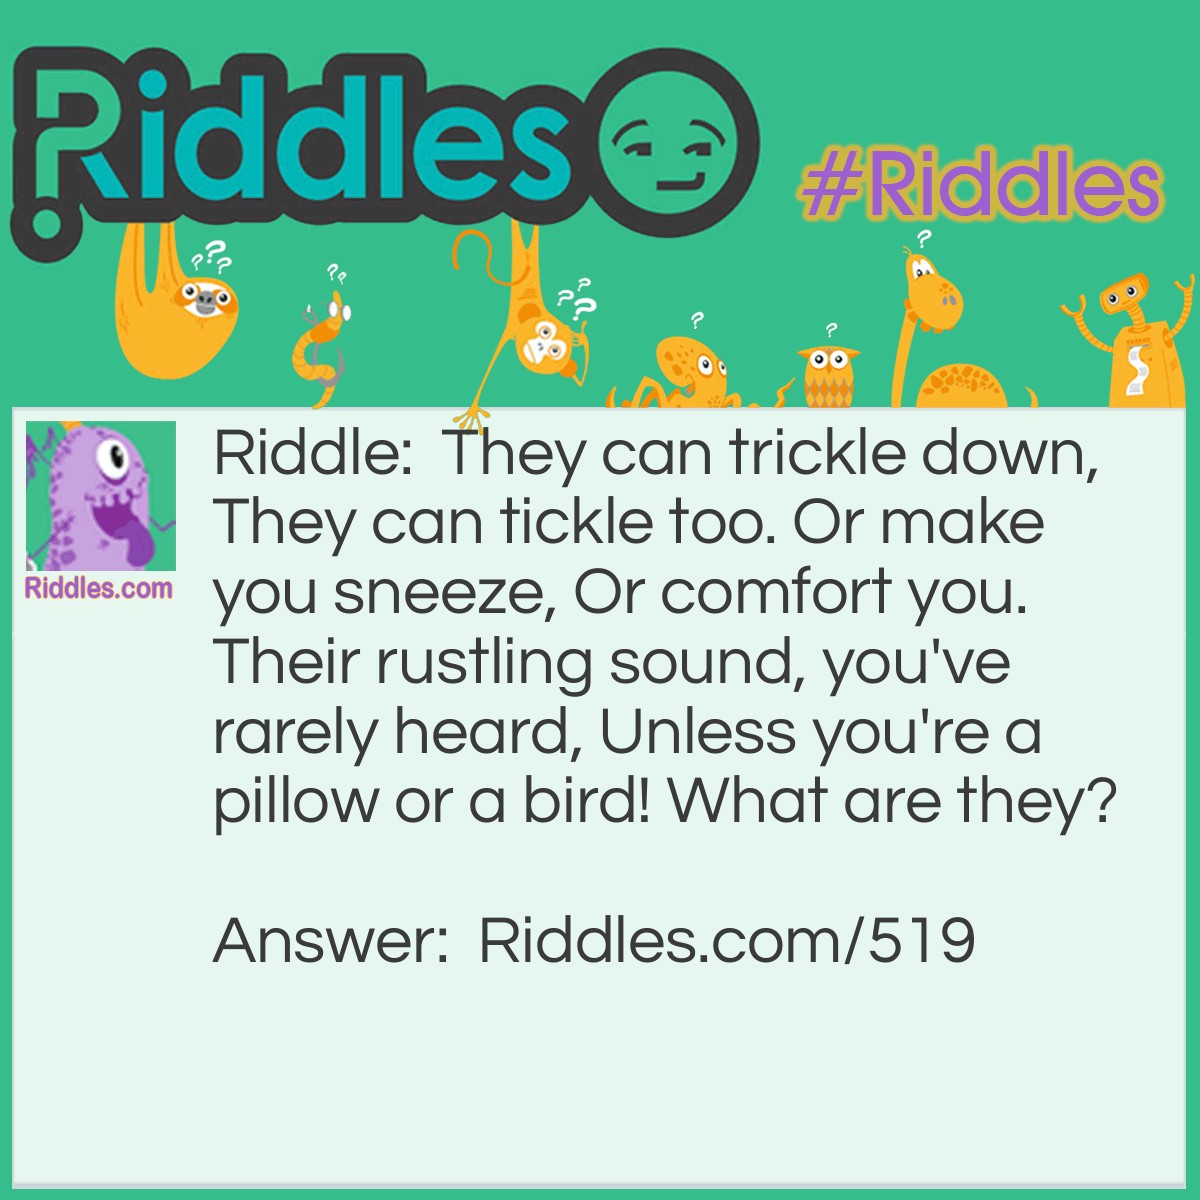 Riddle: They can trickle down, They can tickle too. Or make you sneeze, Or comfort you. Their rustling sound, you've rarely heard, Unless you're a pillow or a bird! What are they? Answer: They are feathers.